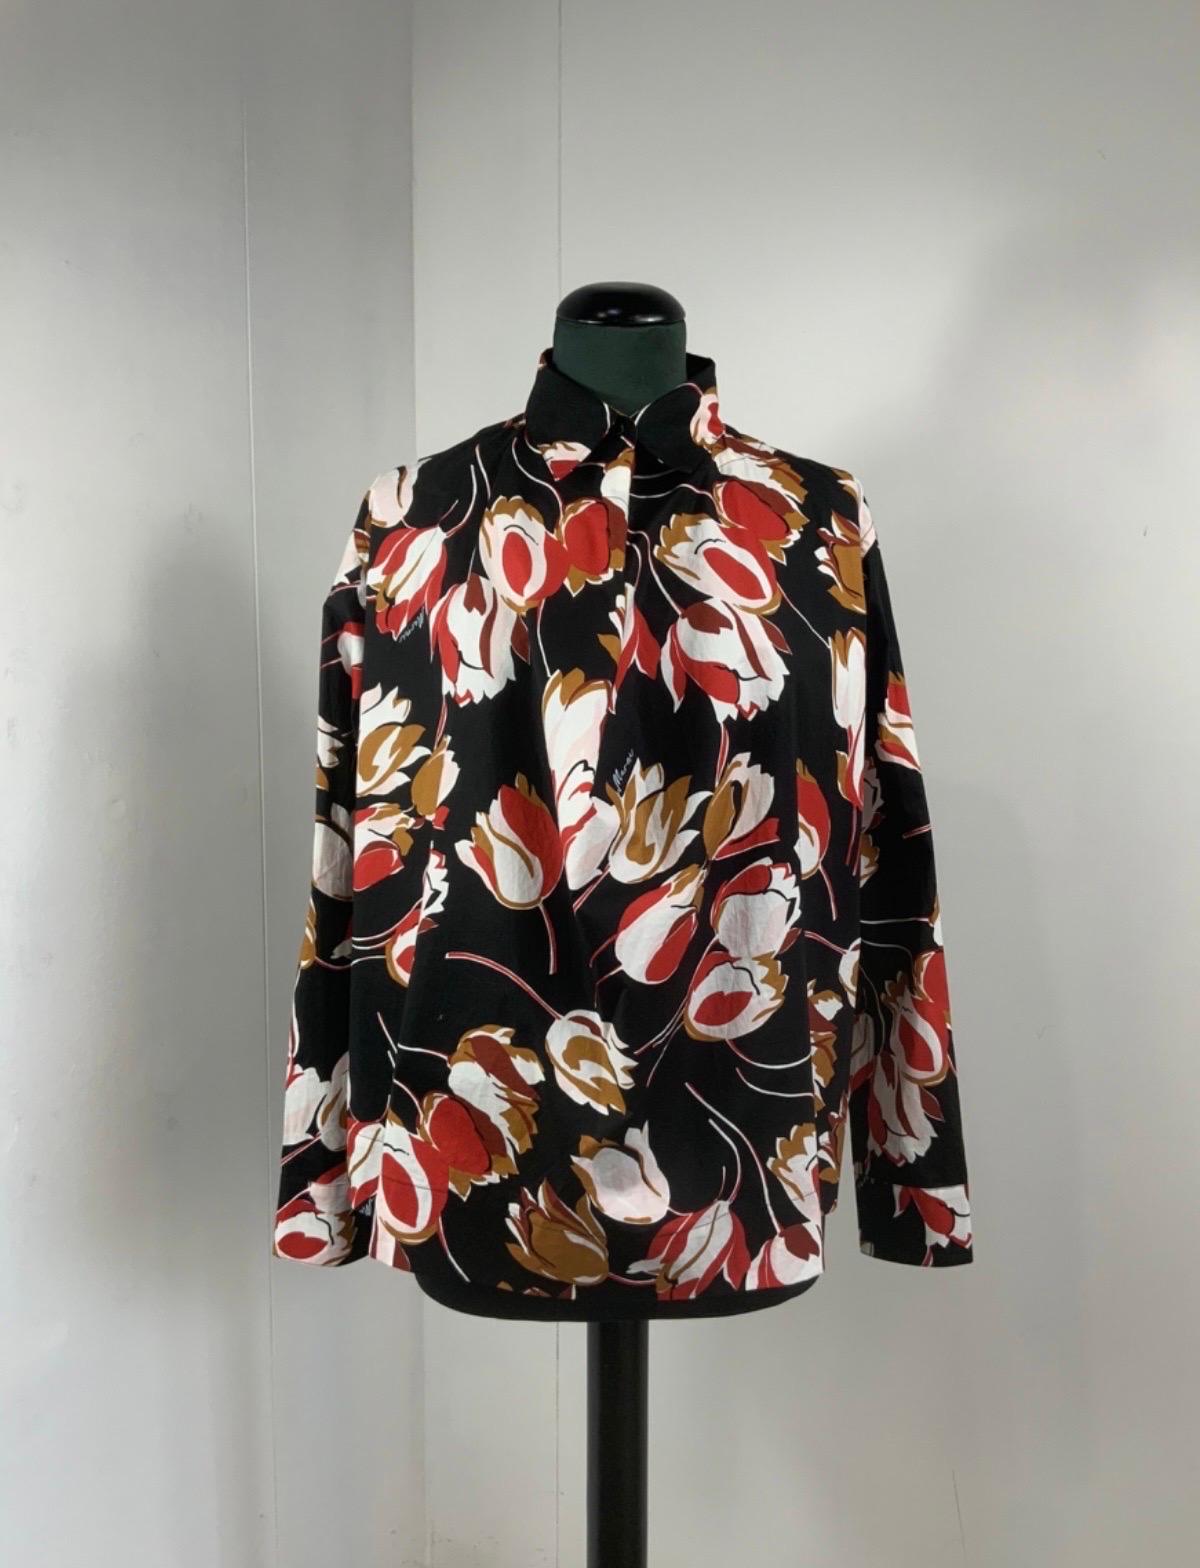 MARNI SHIRT.
100% Cotton. Featuring tulips pattern.
Size 40 ita but fits oversized.
Shoulders 50 cms
Bust 58cm
Length 65cm
Very particular neckline cut that allows you to create different styling.
New, with original tag